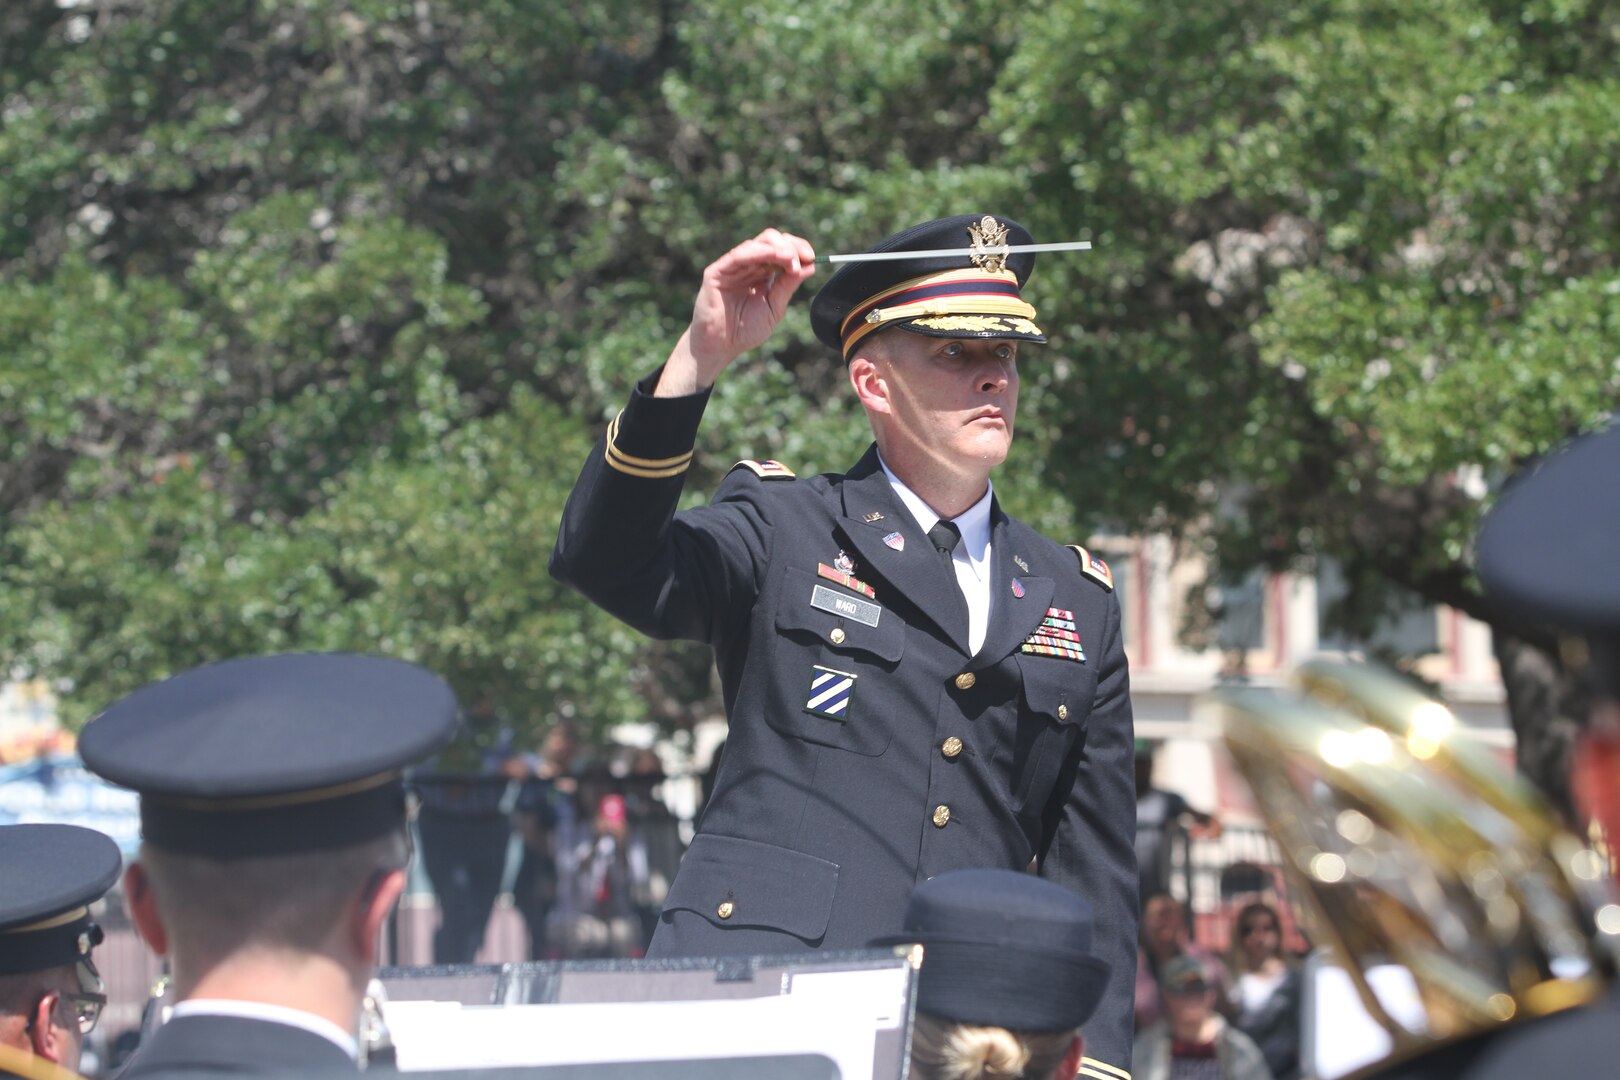 Chief Warrant Officer 4 Jonathan Ward, the bandmaster for 323rd Army Band, conducts “Fort Sam’s Own” during Army Day at the Alamo April 24. The band performed various musical selections to include the National Anthem, the Army Song and La Fiesta de San Antonio, which was written by Charles “Chuck” Booker, a former Army trumpeter with the Fifth Army band before deactivation.